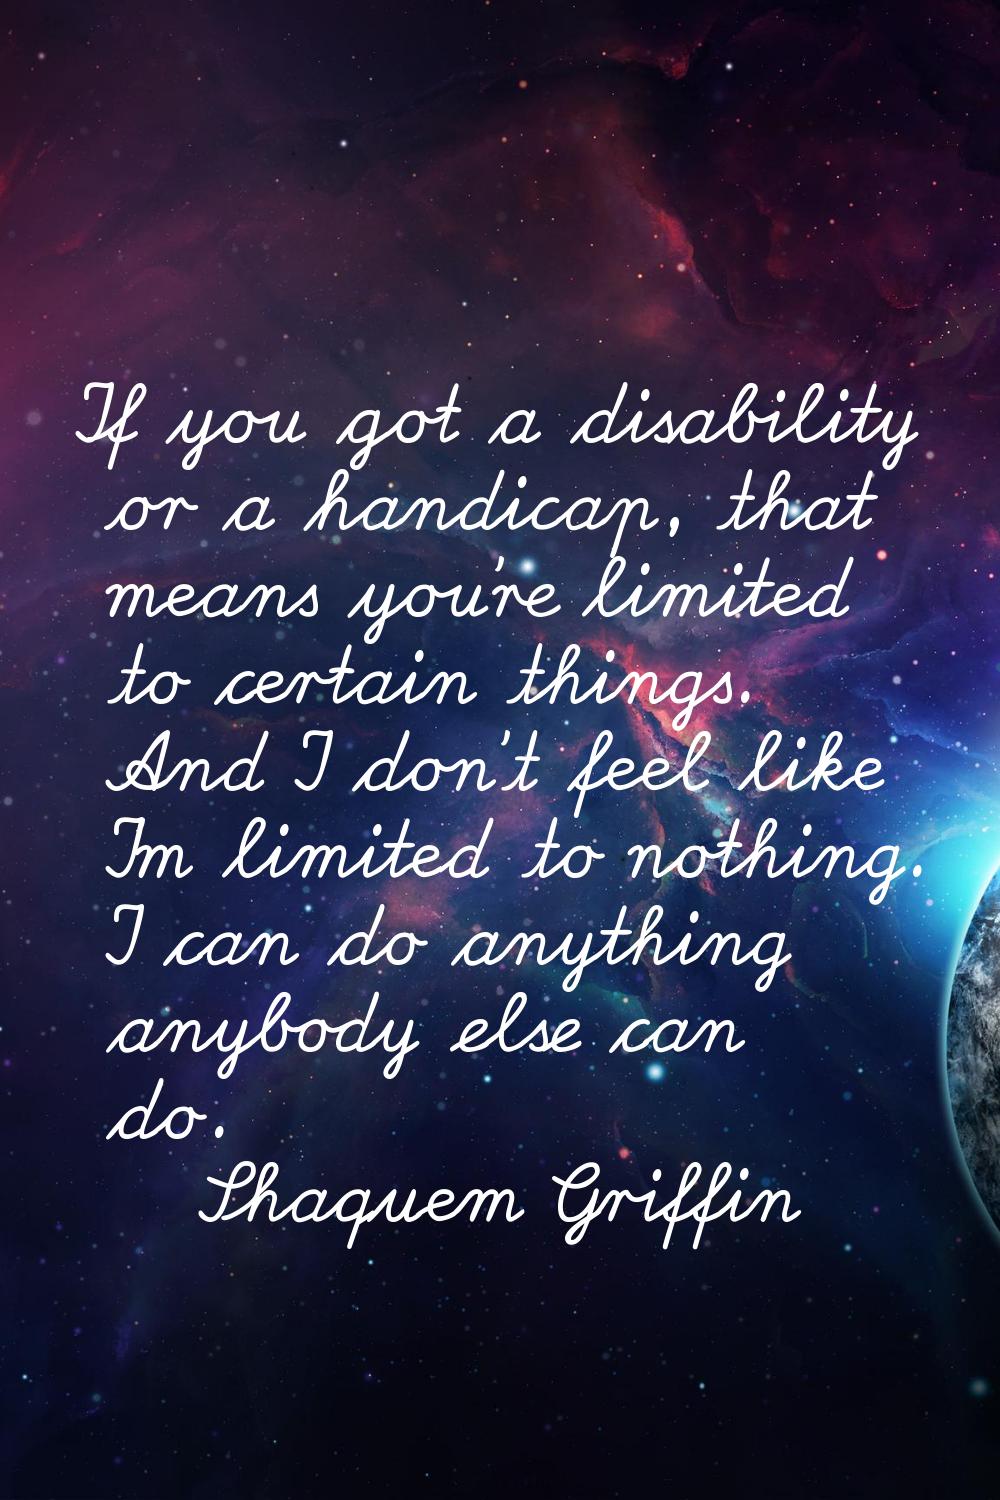 If you got a disability or a handicap, that means you're limited to certain things. And I don't fee